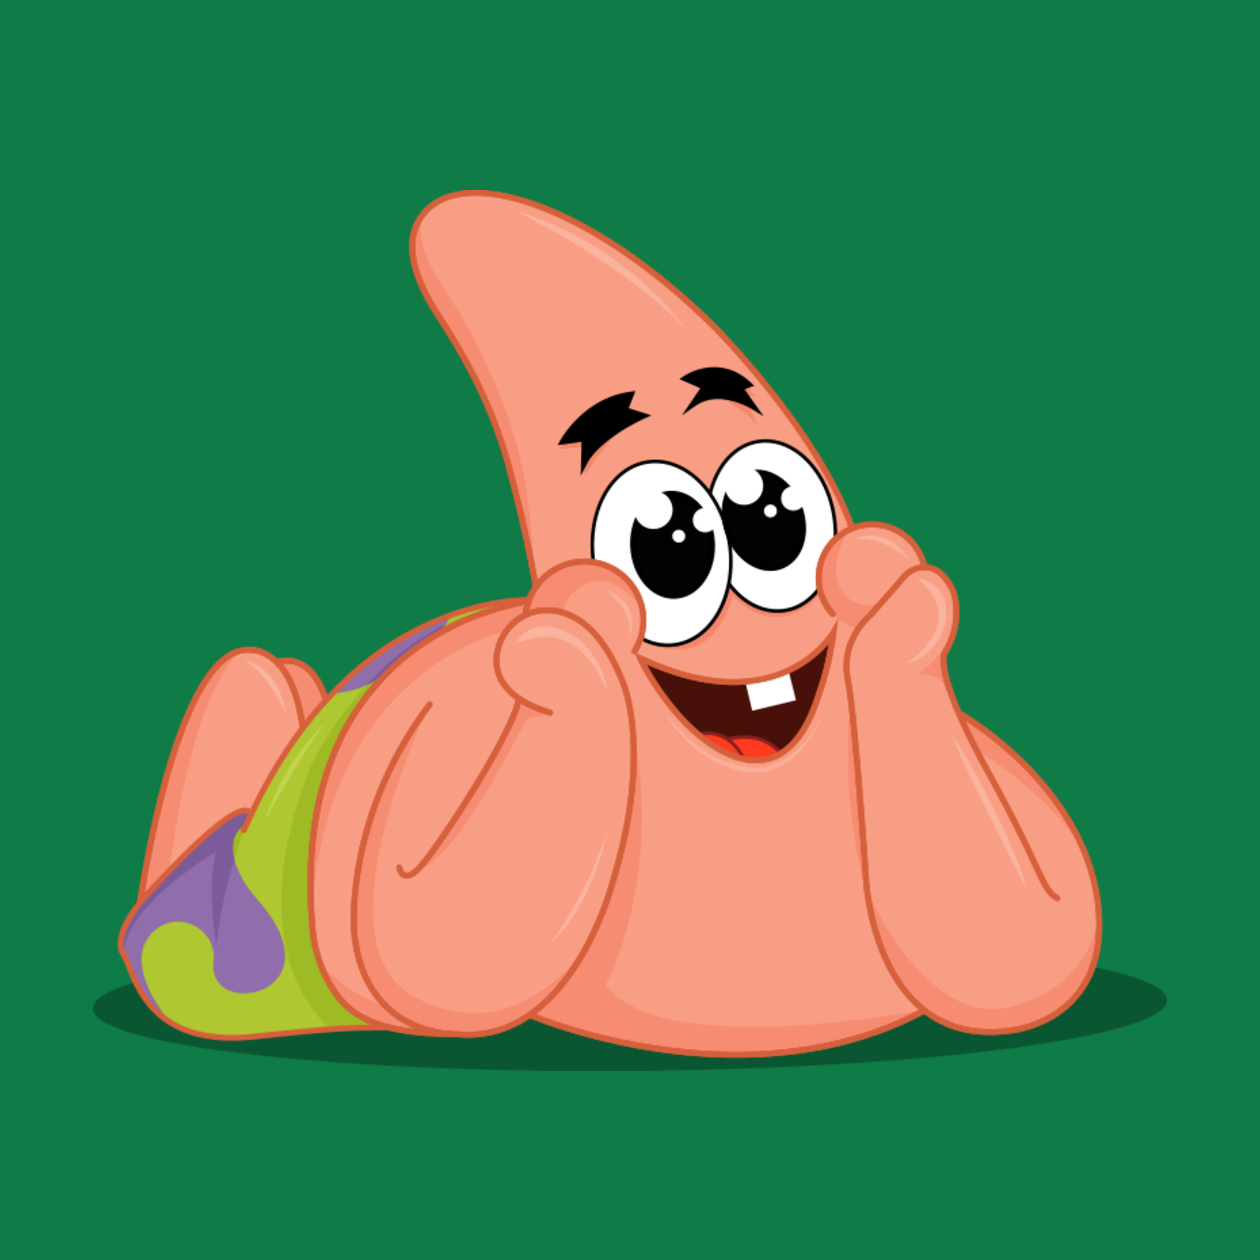 Patrick Star,Patrick Star Best Picture For funny photo laughing For Your Ta...